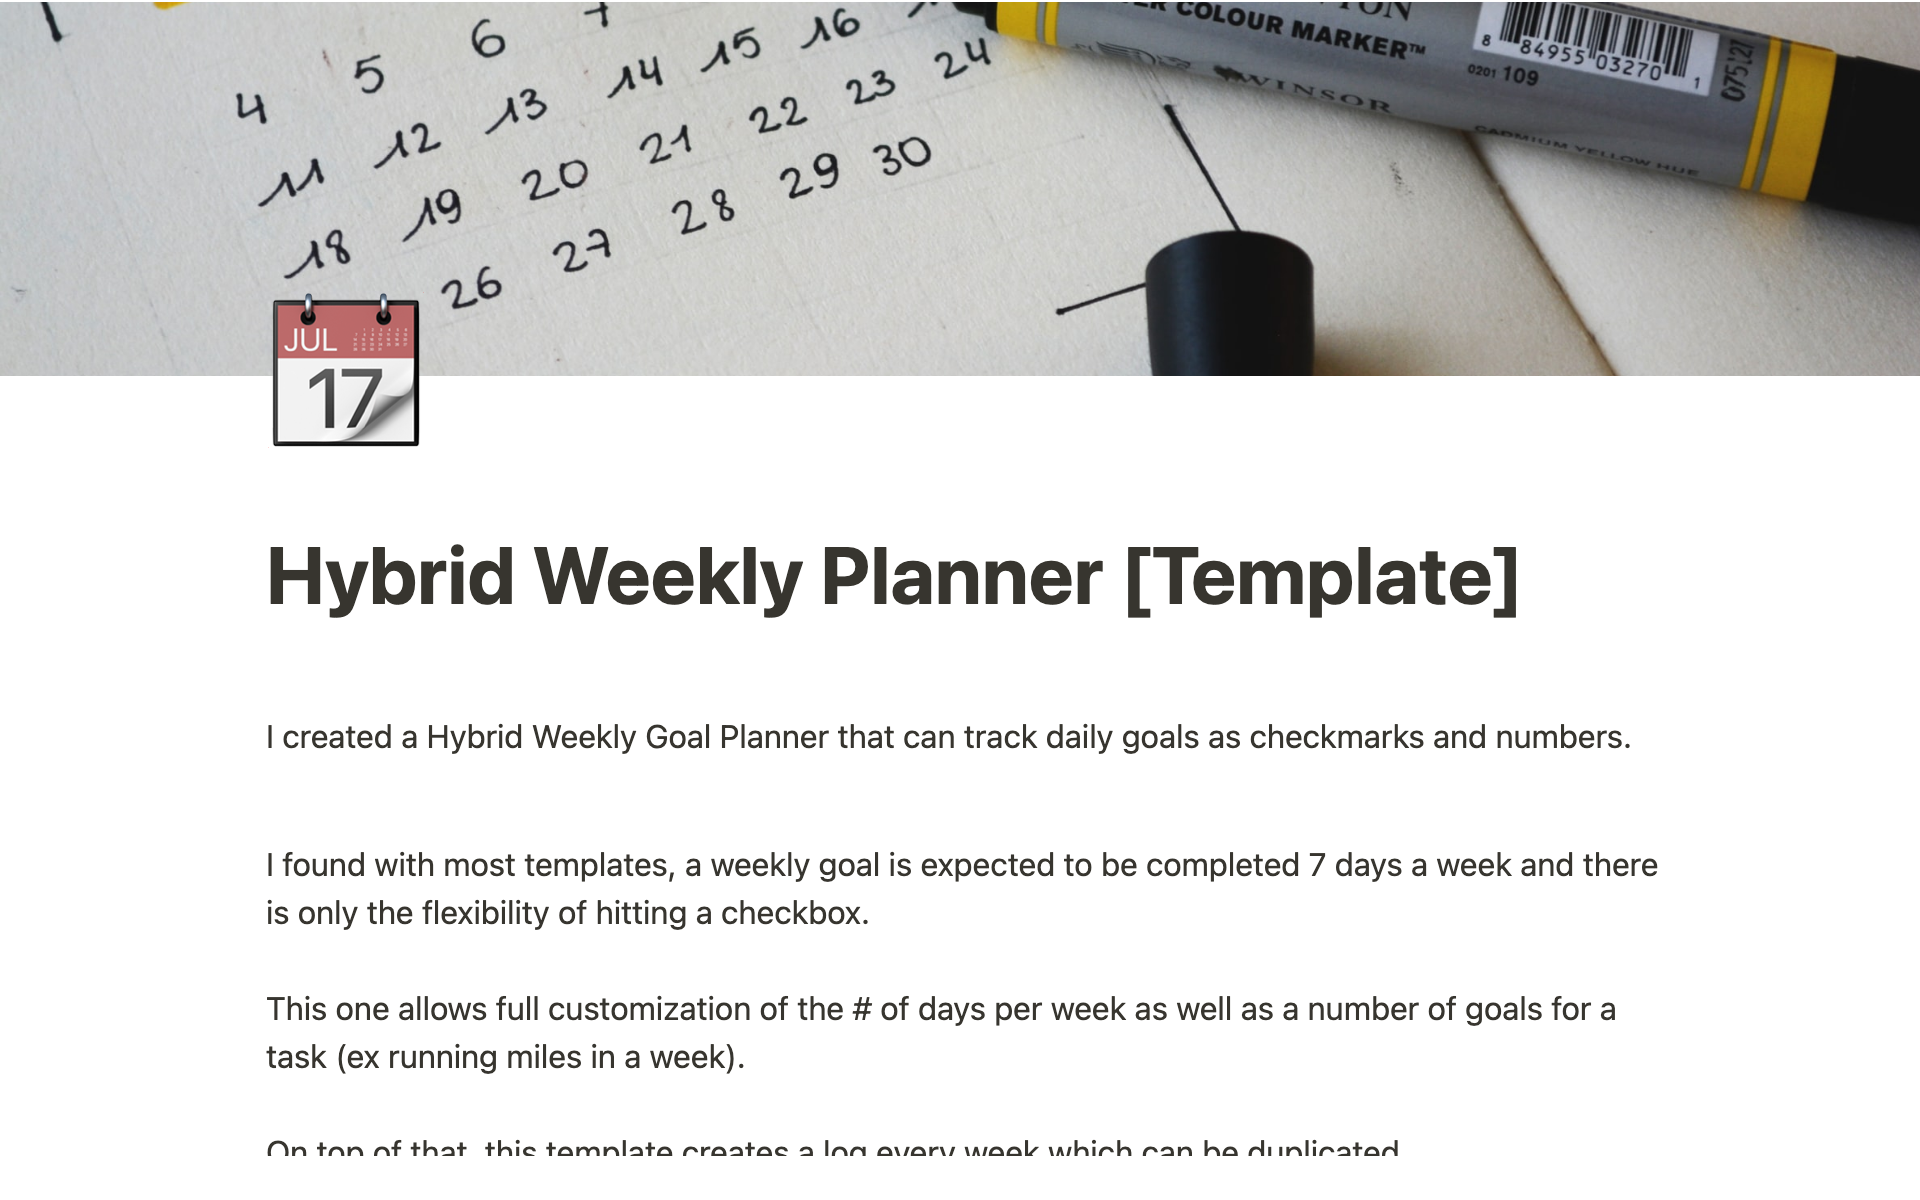 I created a Hybrid Weekly Goal Planner that can track daily goals as checkmarks and numbers.